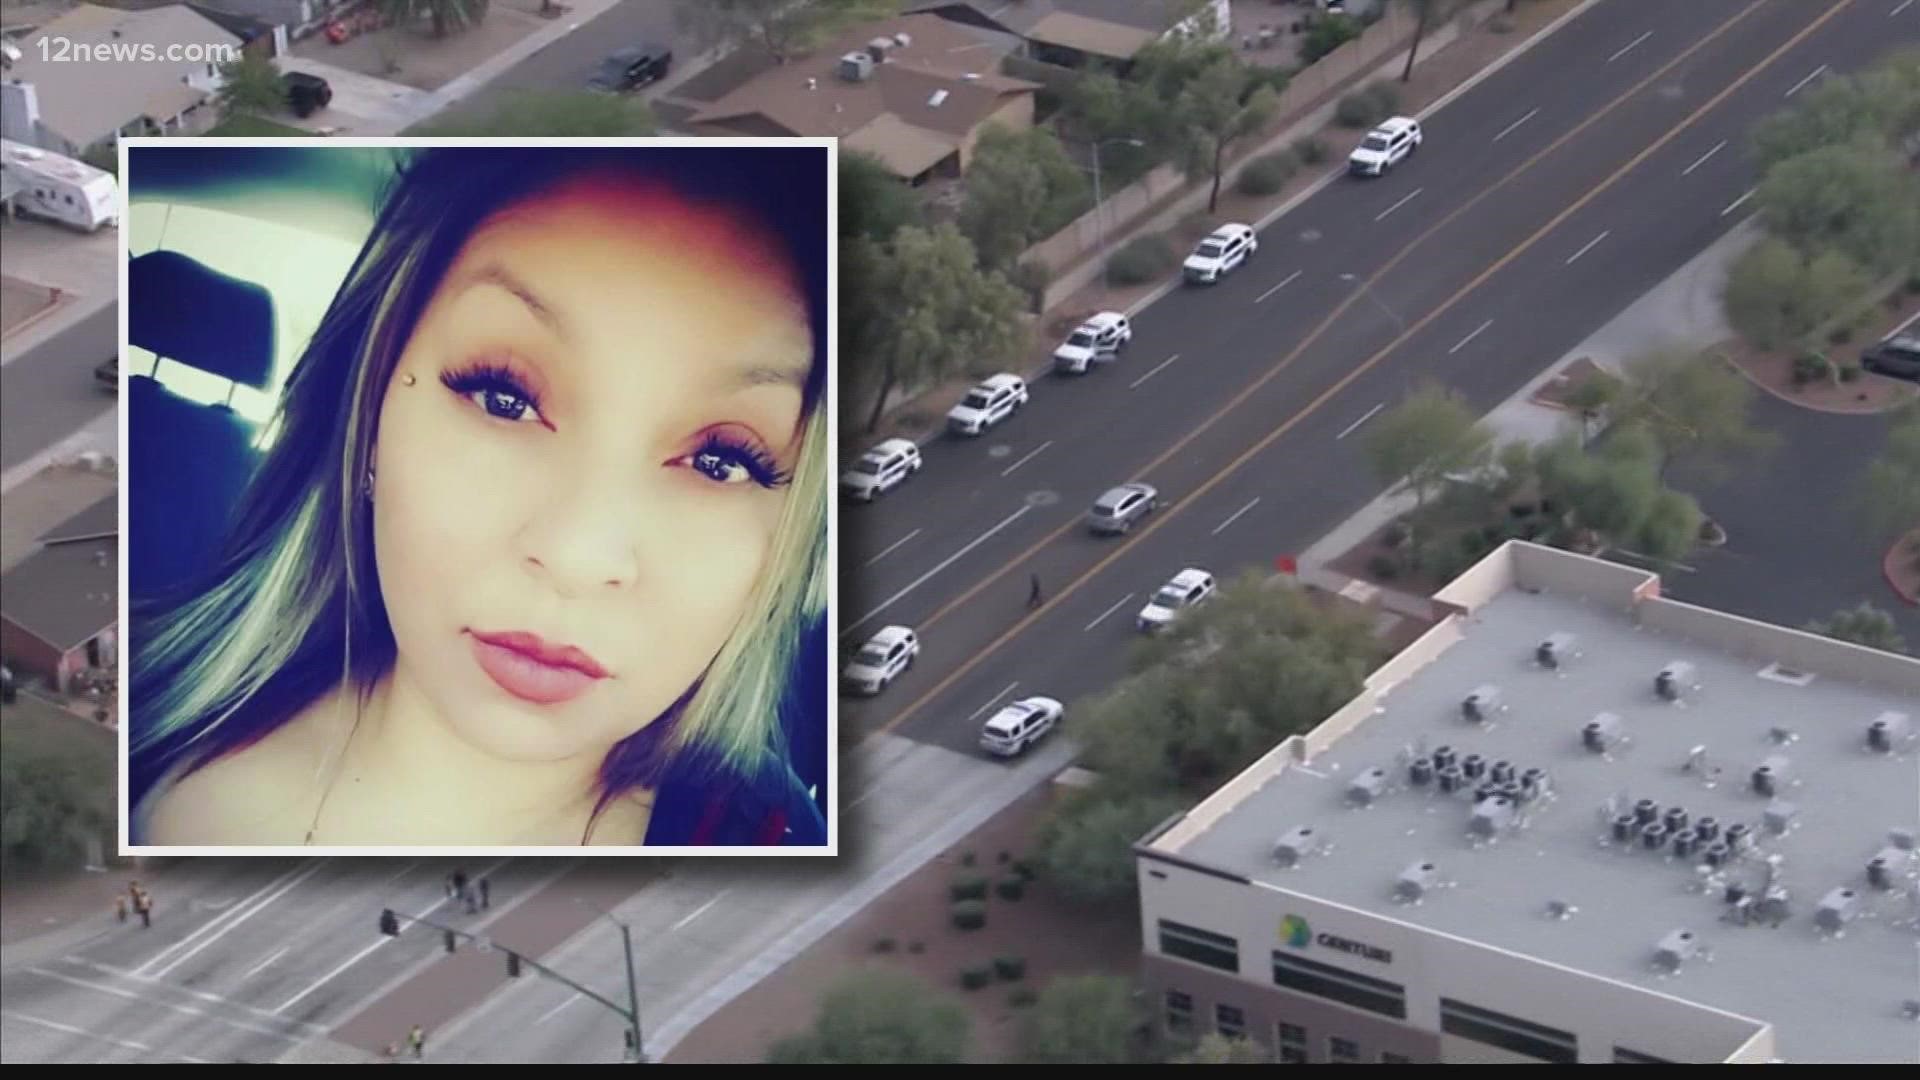 Four days after Stella Montes was shot and killed while driving in north Phoenix, police have not released any new information